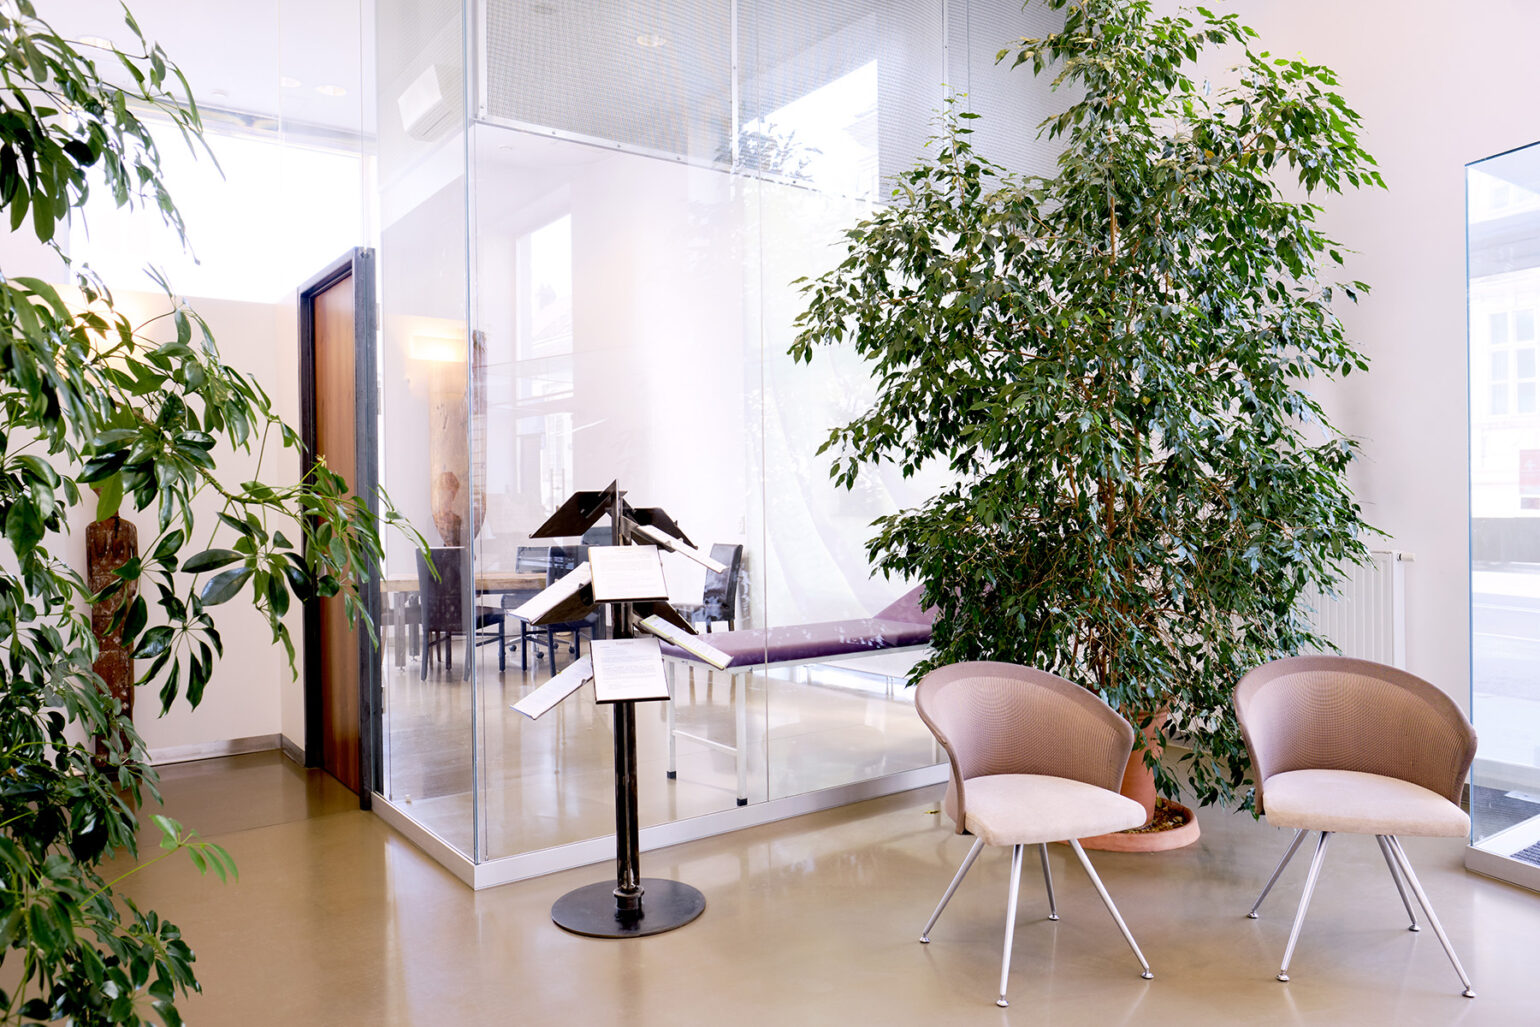 Barrier free accessible clinic in Vienna. All rooms within the clinic are on one level